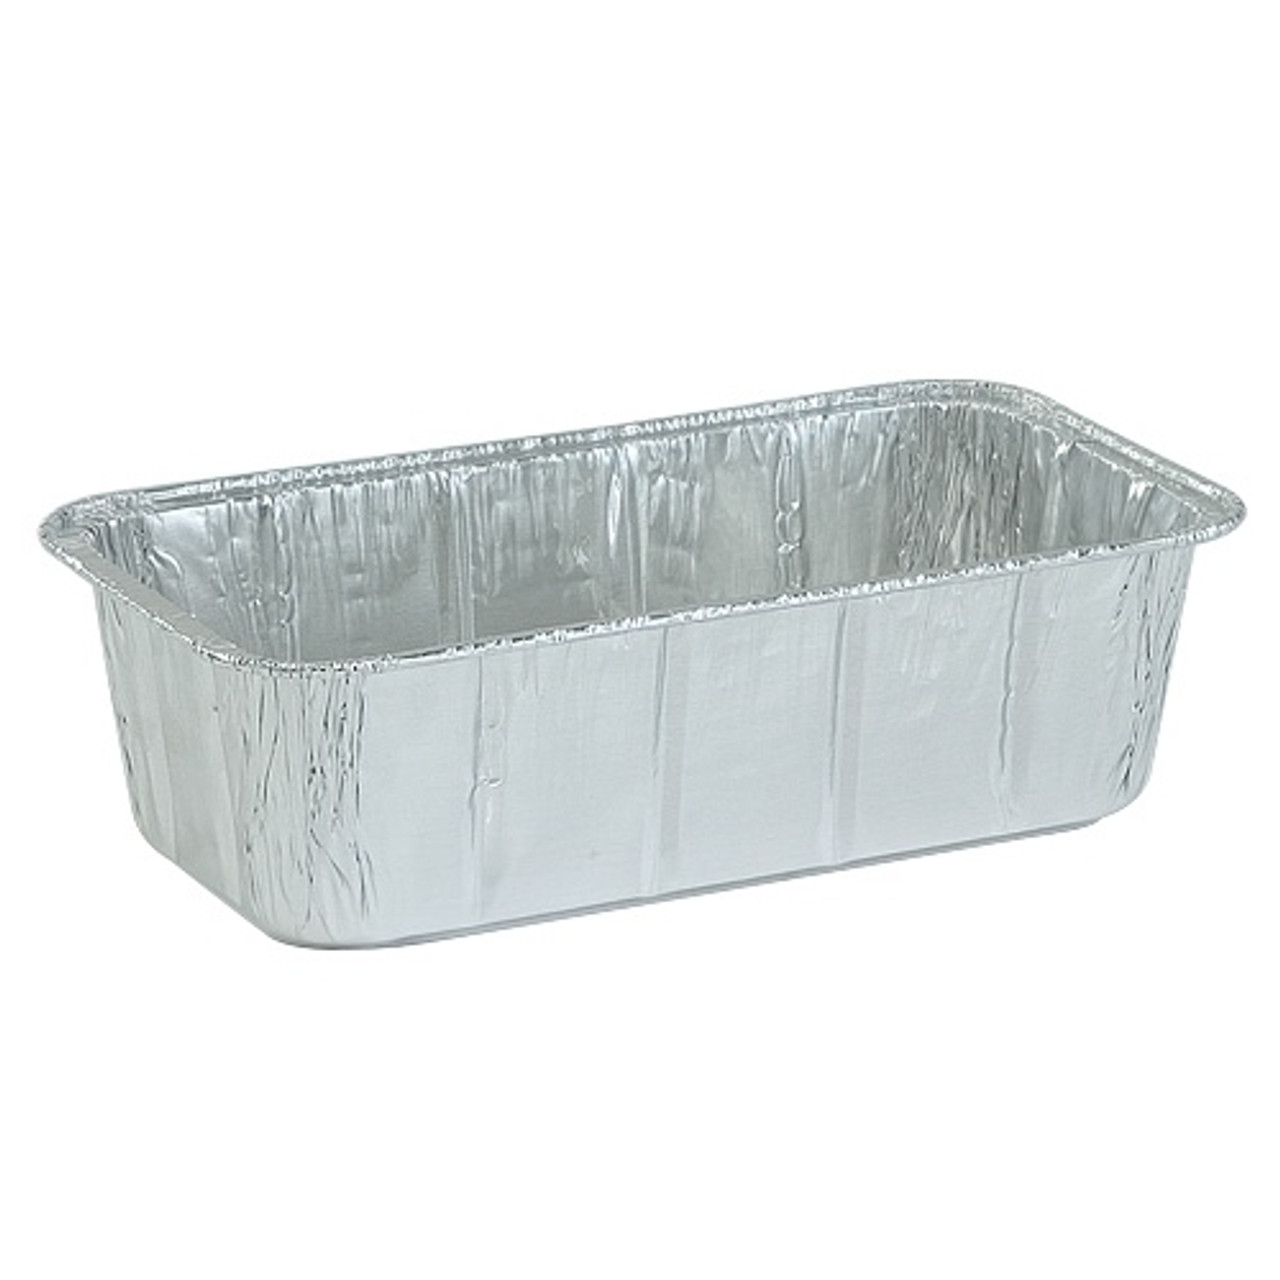 https://cdn11.bigcommerce.com/s-hgqmwywp99/images/stencil/1280x1280/products/49022/43813/2-lb-aluminum-disposable-loaf-pan-3__09675.1675880305.jpg?c=1?imbypass=on